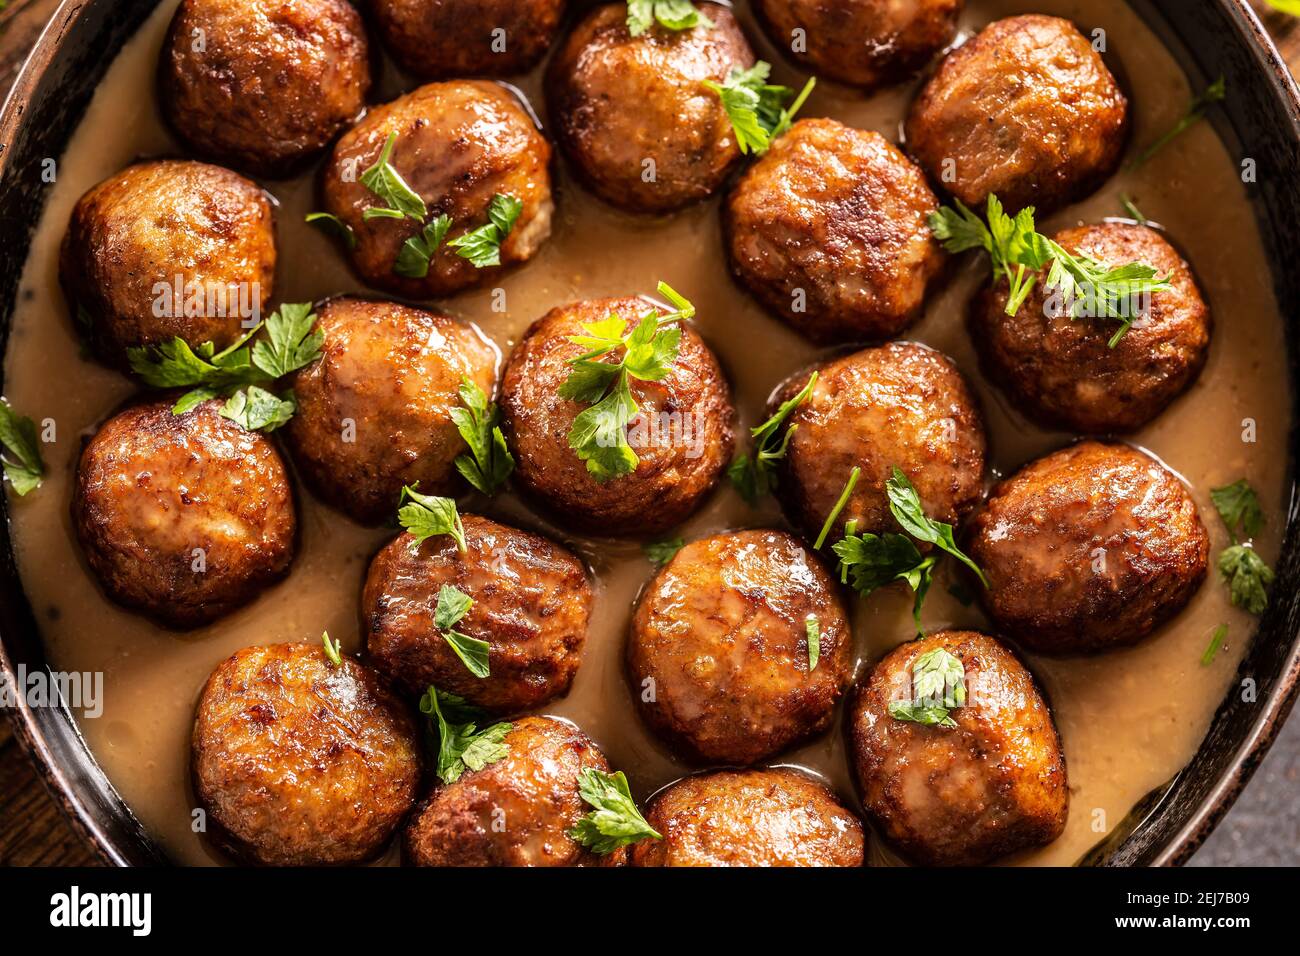 Top view of a pan with freshly-made kottbullar meatballs in a sauce. Stock Photo